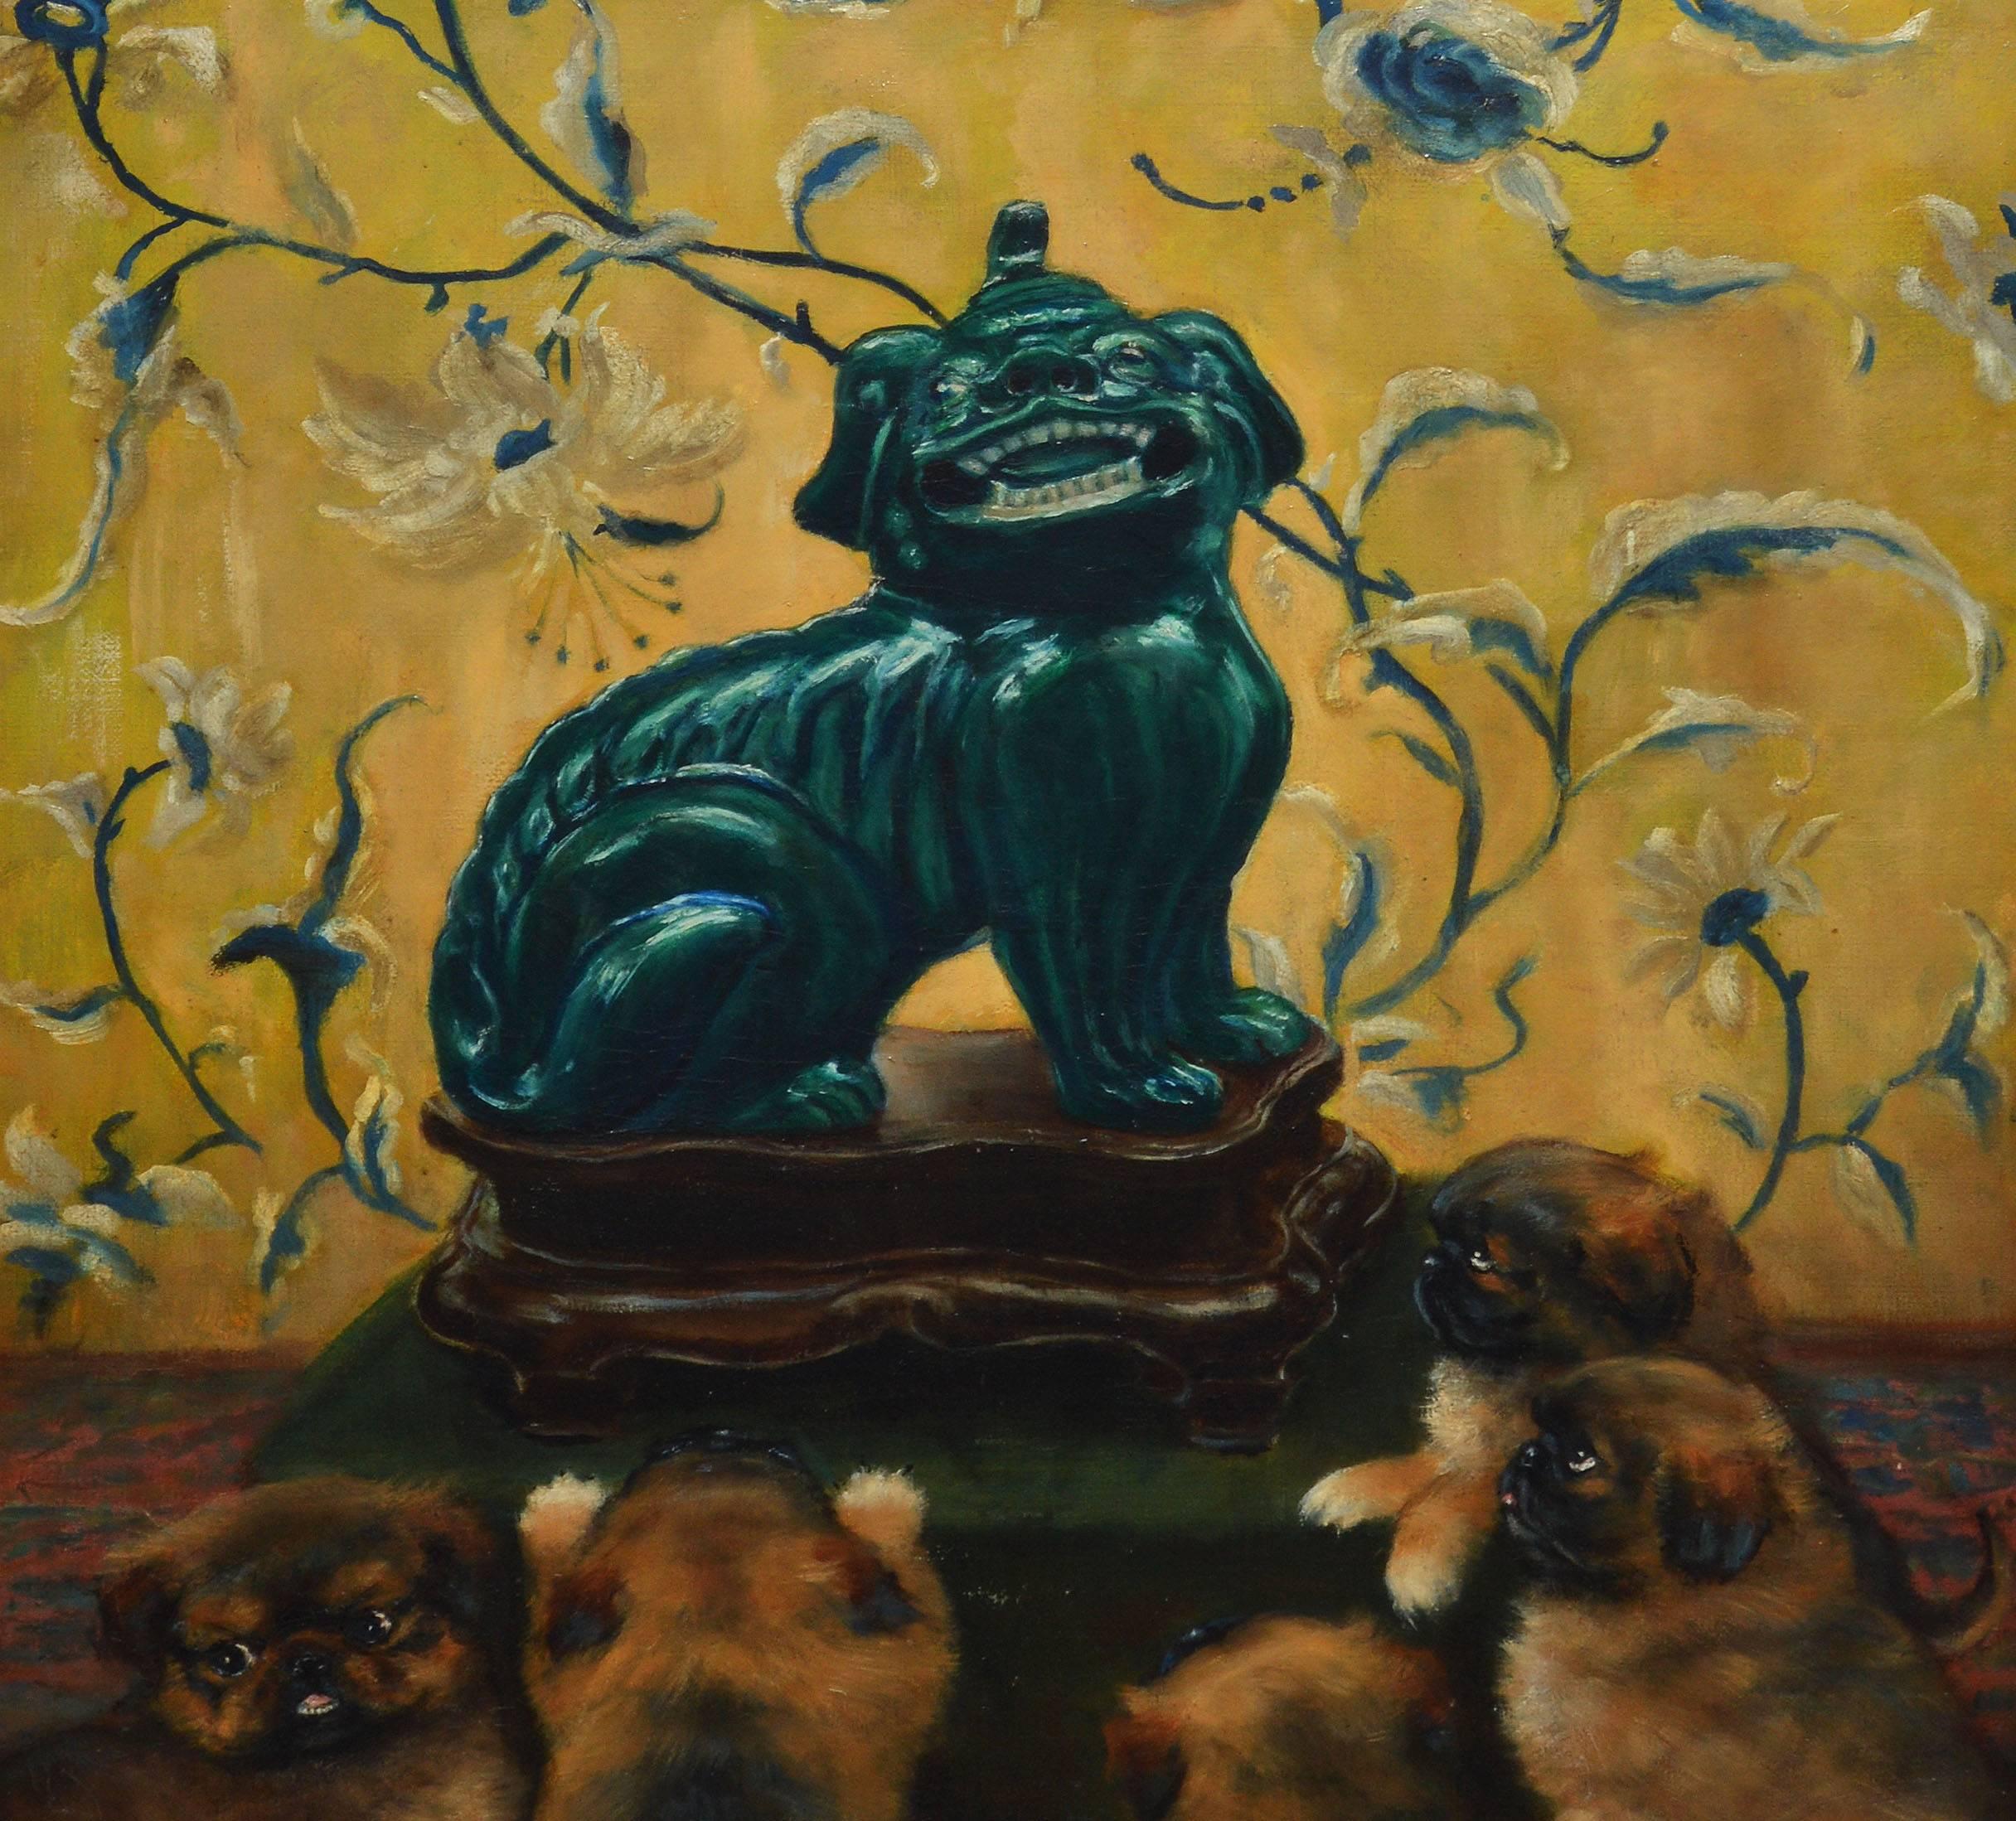 Impressionist painting of a Fu Dog sculpture and adoring puppies.  Oil on canvas, circa 1911.  Signed illegibly lower right.  Displayed in a giltwood frame.  Image size, 20"L x 27"H, overall 25"L x 32"H.